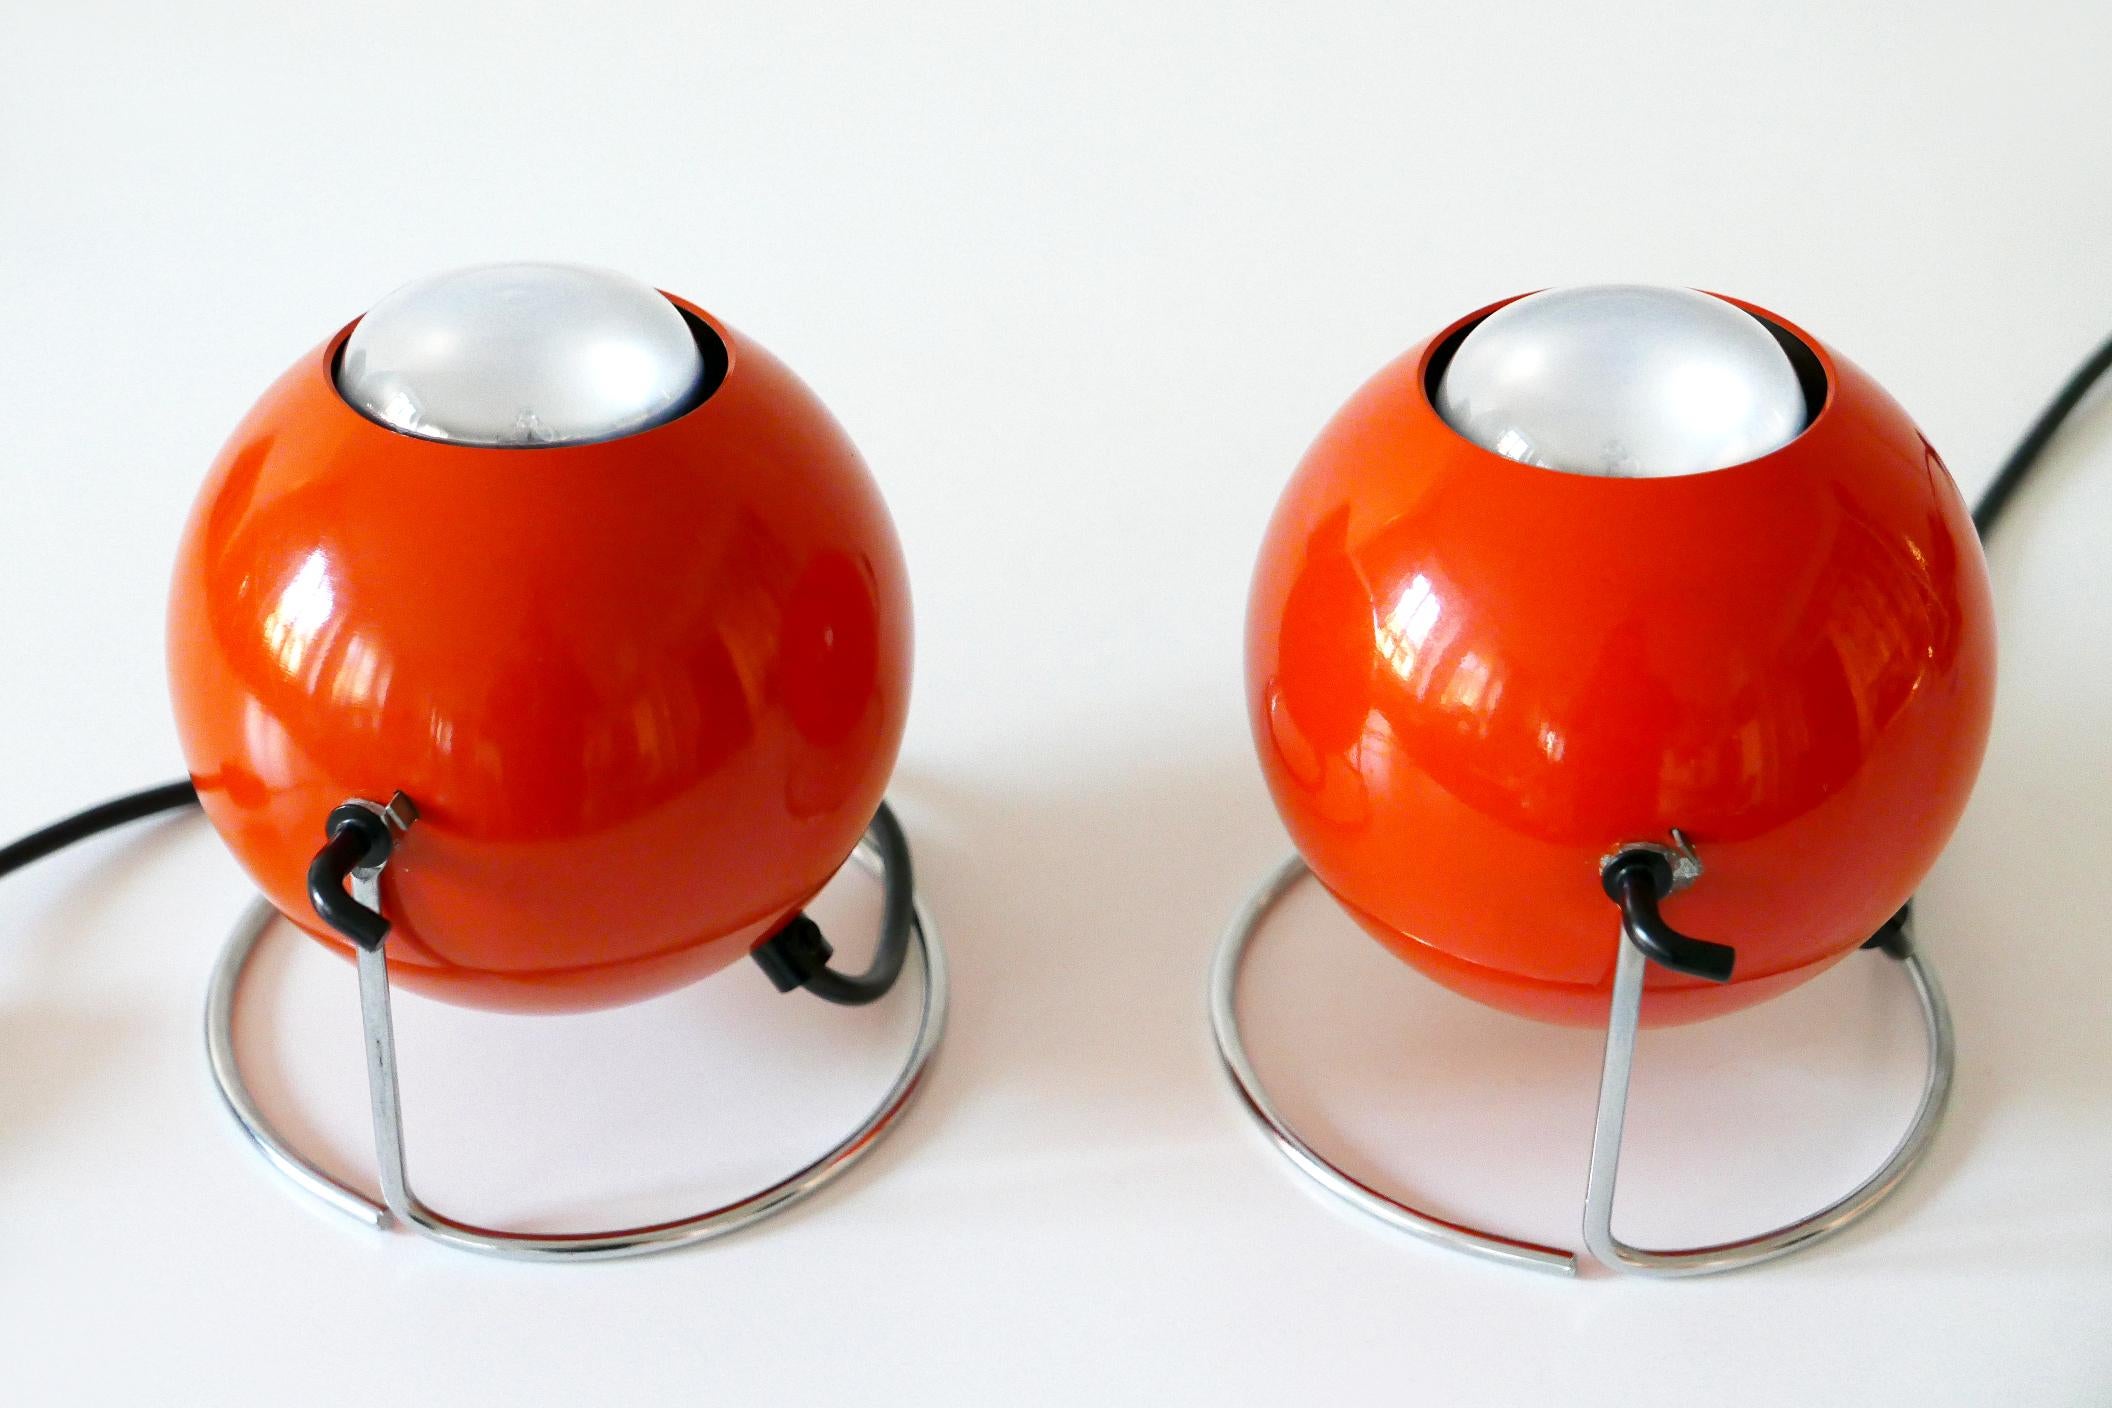 Set of Two Mid-Century Modern Metal 'Eye' Table Lamps, ERCO, 1960s-1970s Germany For Sale 4